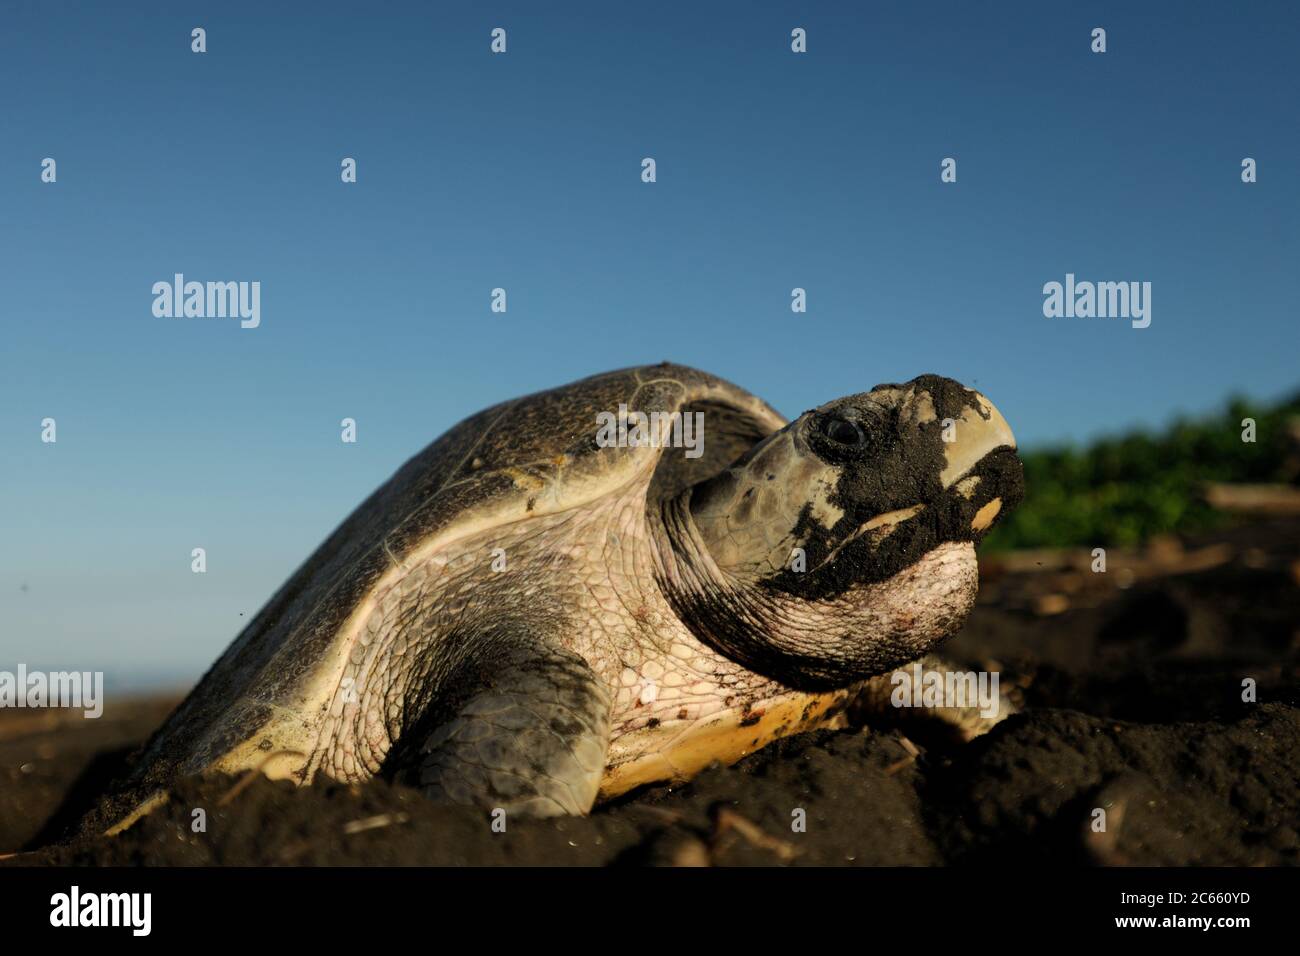 The olive ridley sea turtles (Lepidochelys olivacea) are famous for their behaviour to nest also during the day. Their arribada (mass nesting event with several days of duration) only pauses during hot midday temperatures. Stock Photo